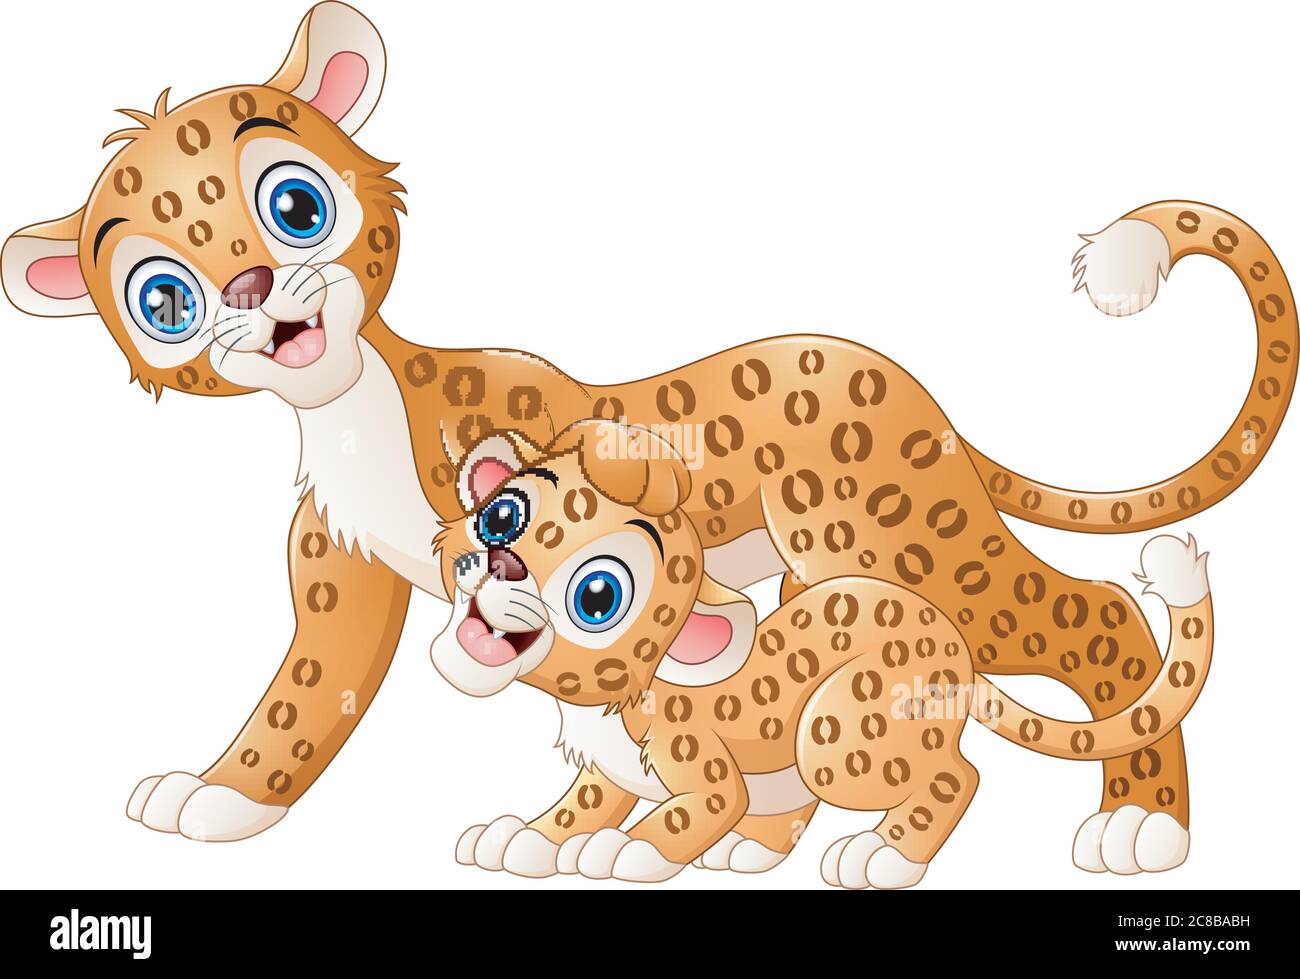 Illustration of Mother leopard and cub leopard cartoon Stock Vector